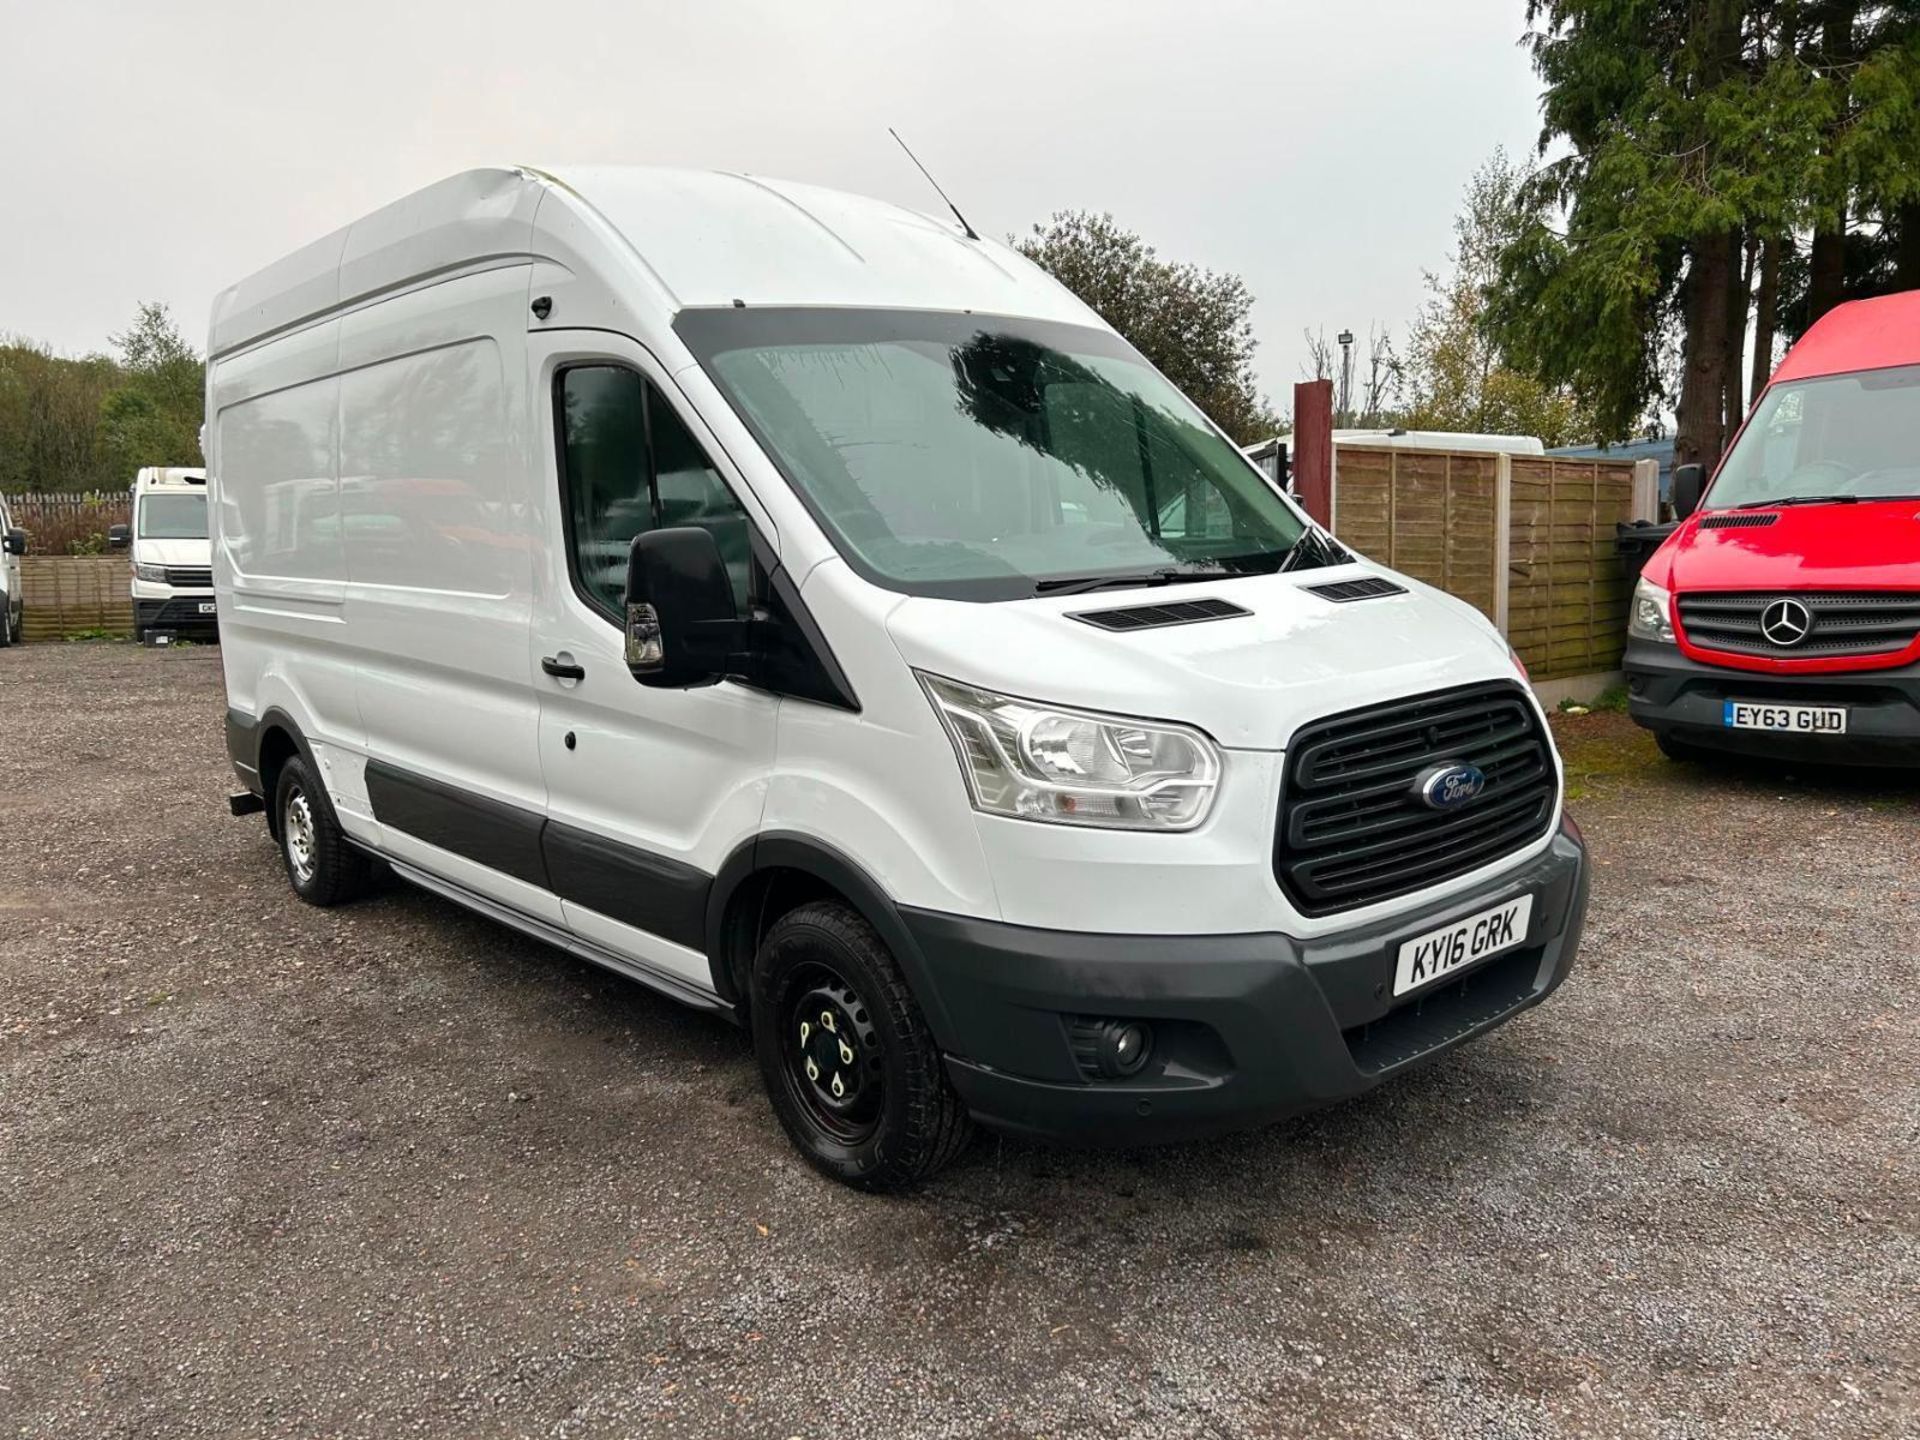 DURABLE WORKHORSE: 2016 FORD TRANSIT 2.2 TDCI L3 H3